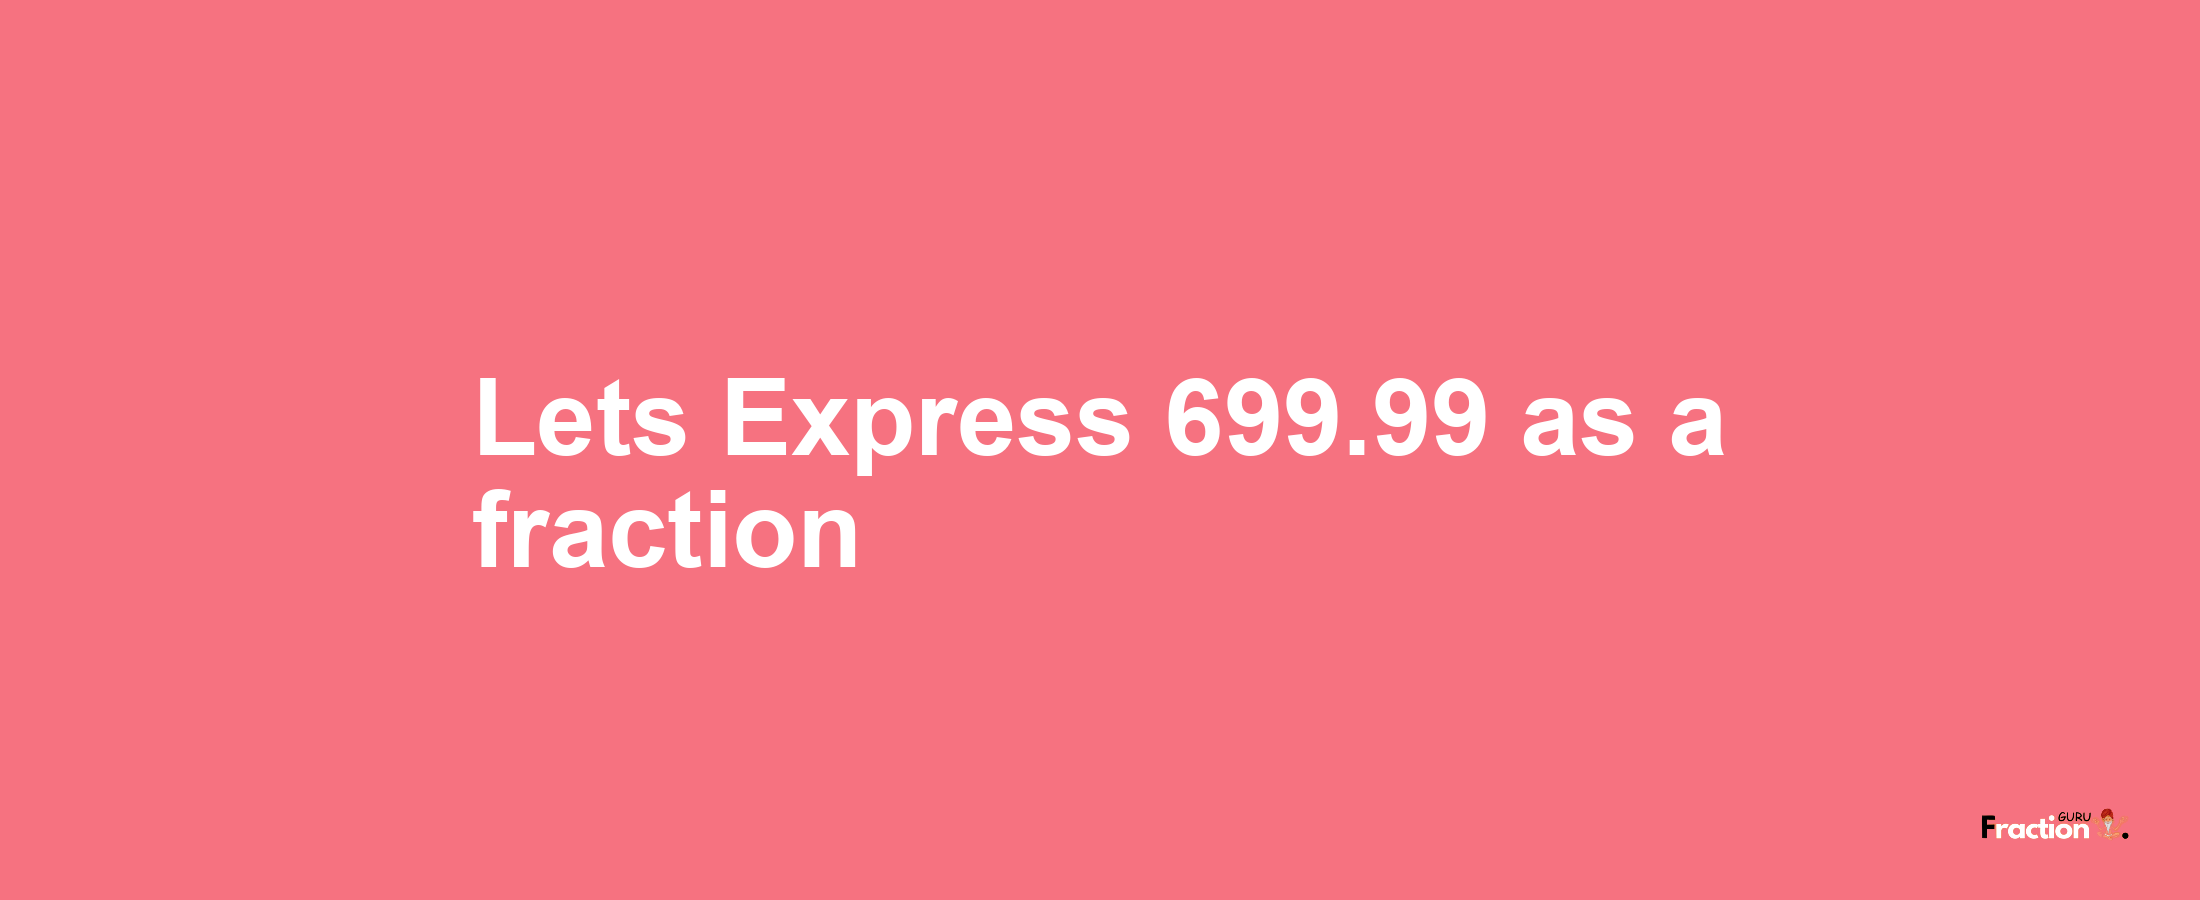 Lets Express 699.99 as afraction